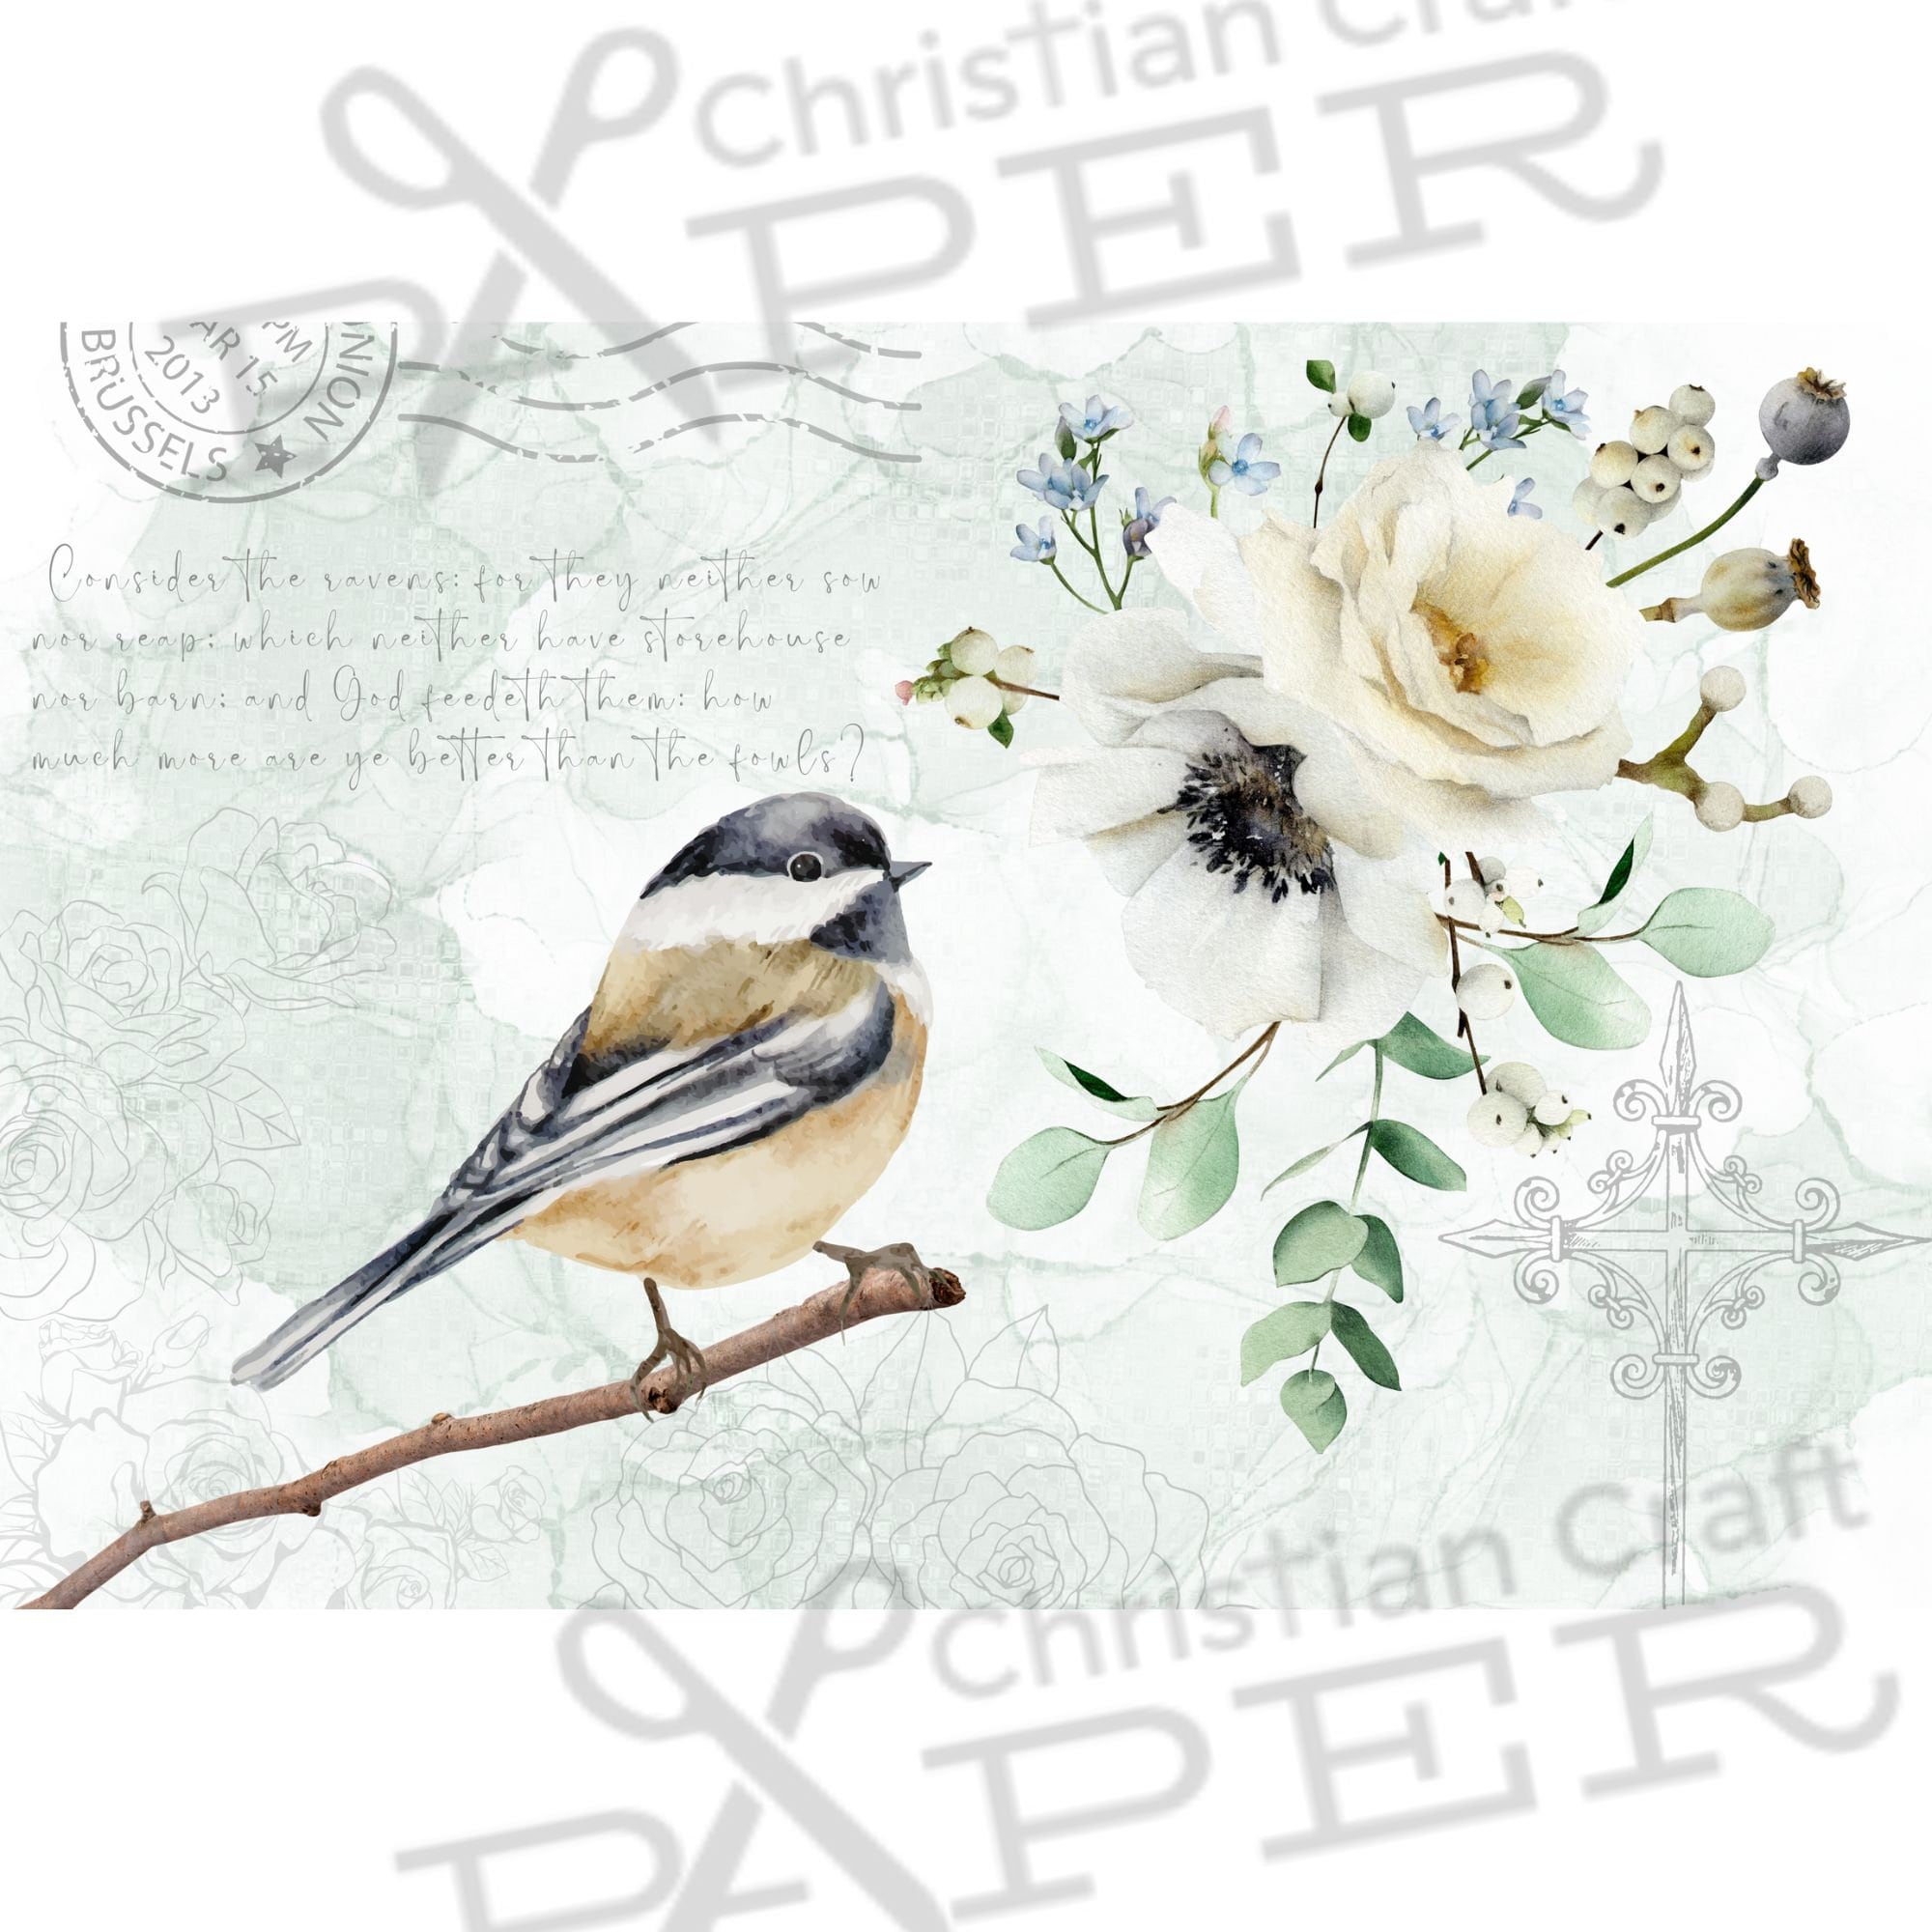 Premium Christian Wrapping Paper for all occasions – Christian Craft Paper